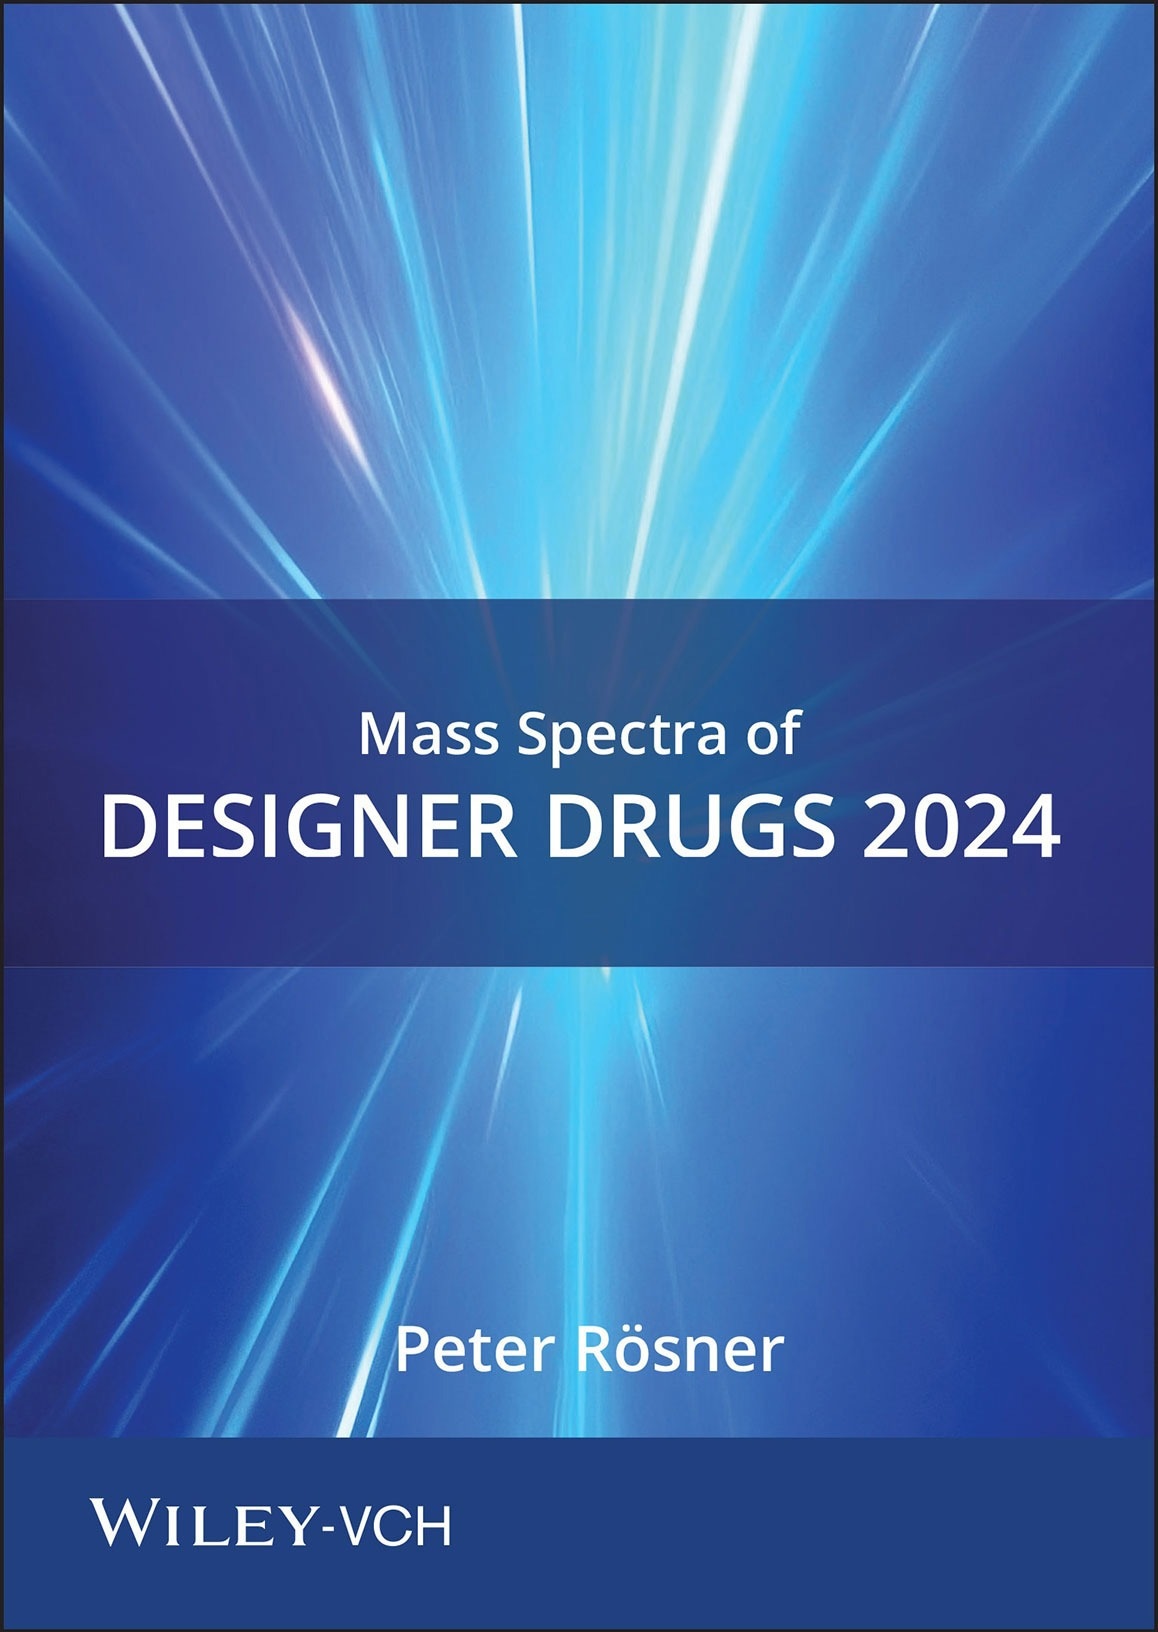 Wiley releases Mass Spectra of Designer Drugs 2024 to accelerate forensics analysis of fentanyls, cannabinoids, and more